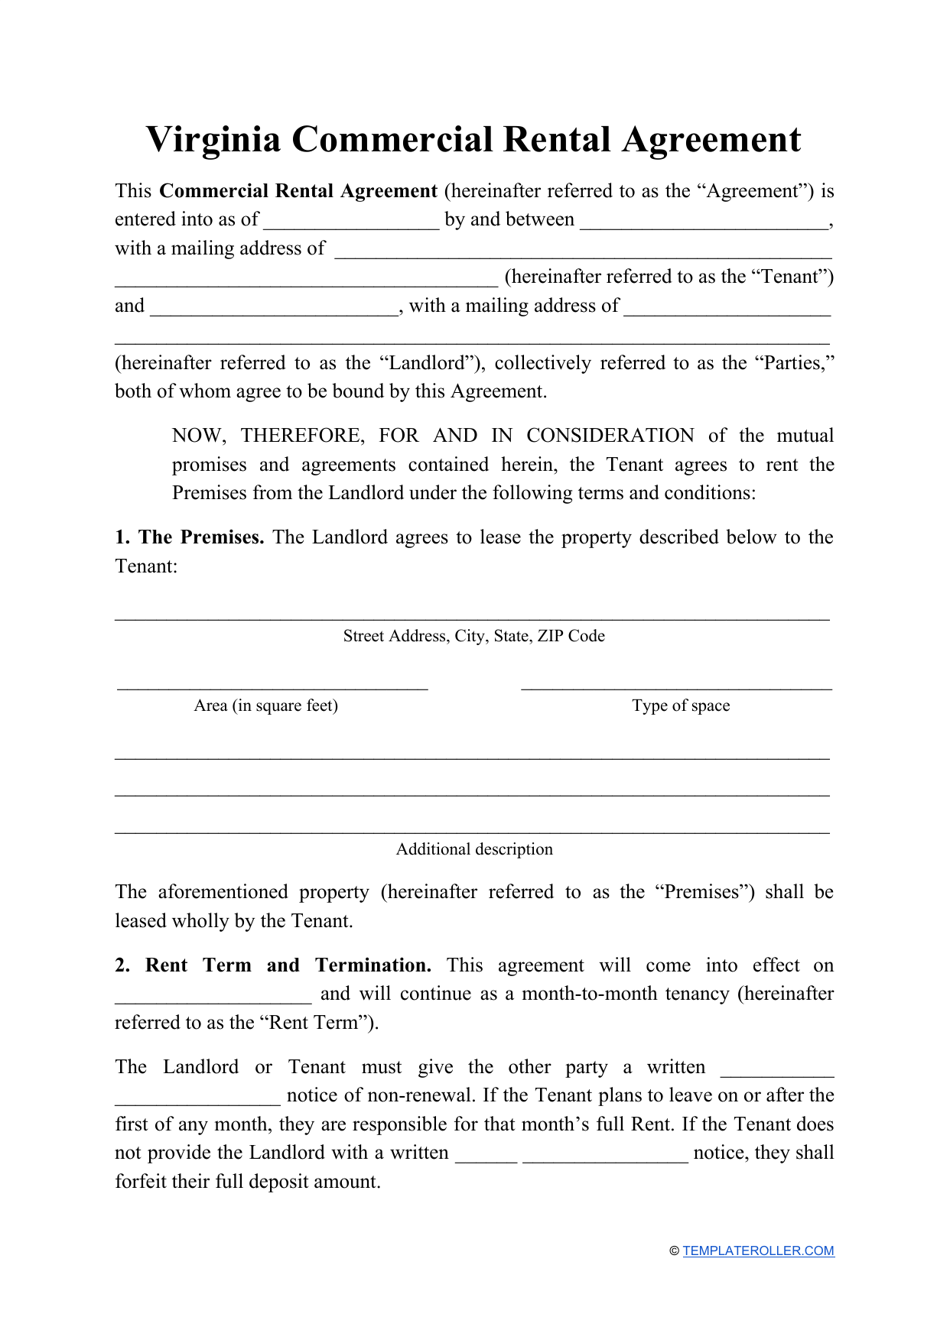 Commercial Rental Agreement Template - Virginia, Page 1